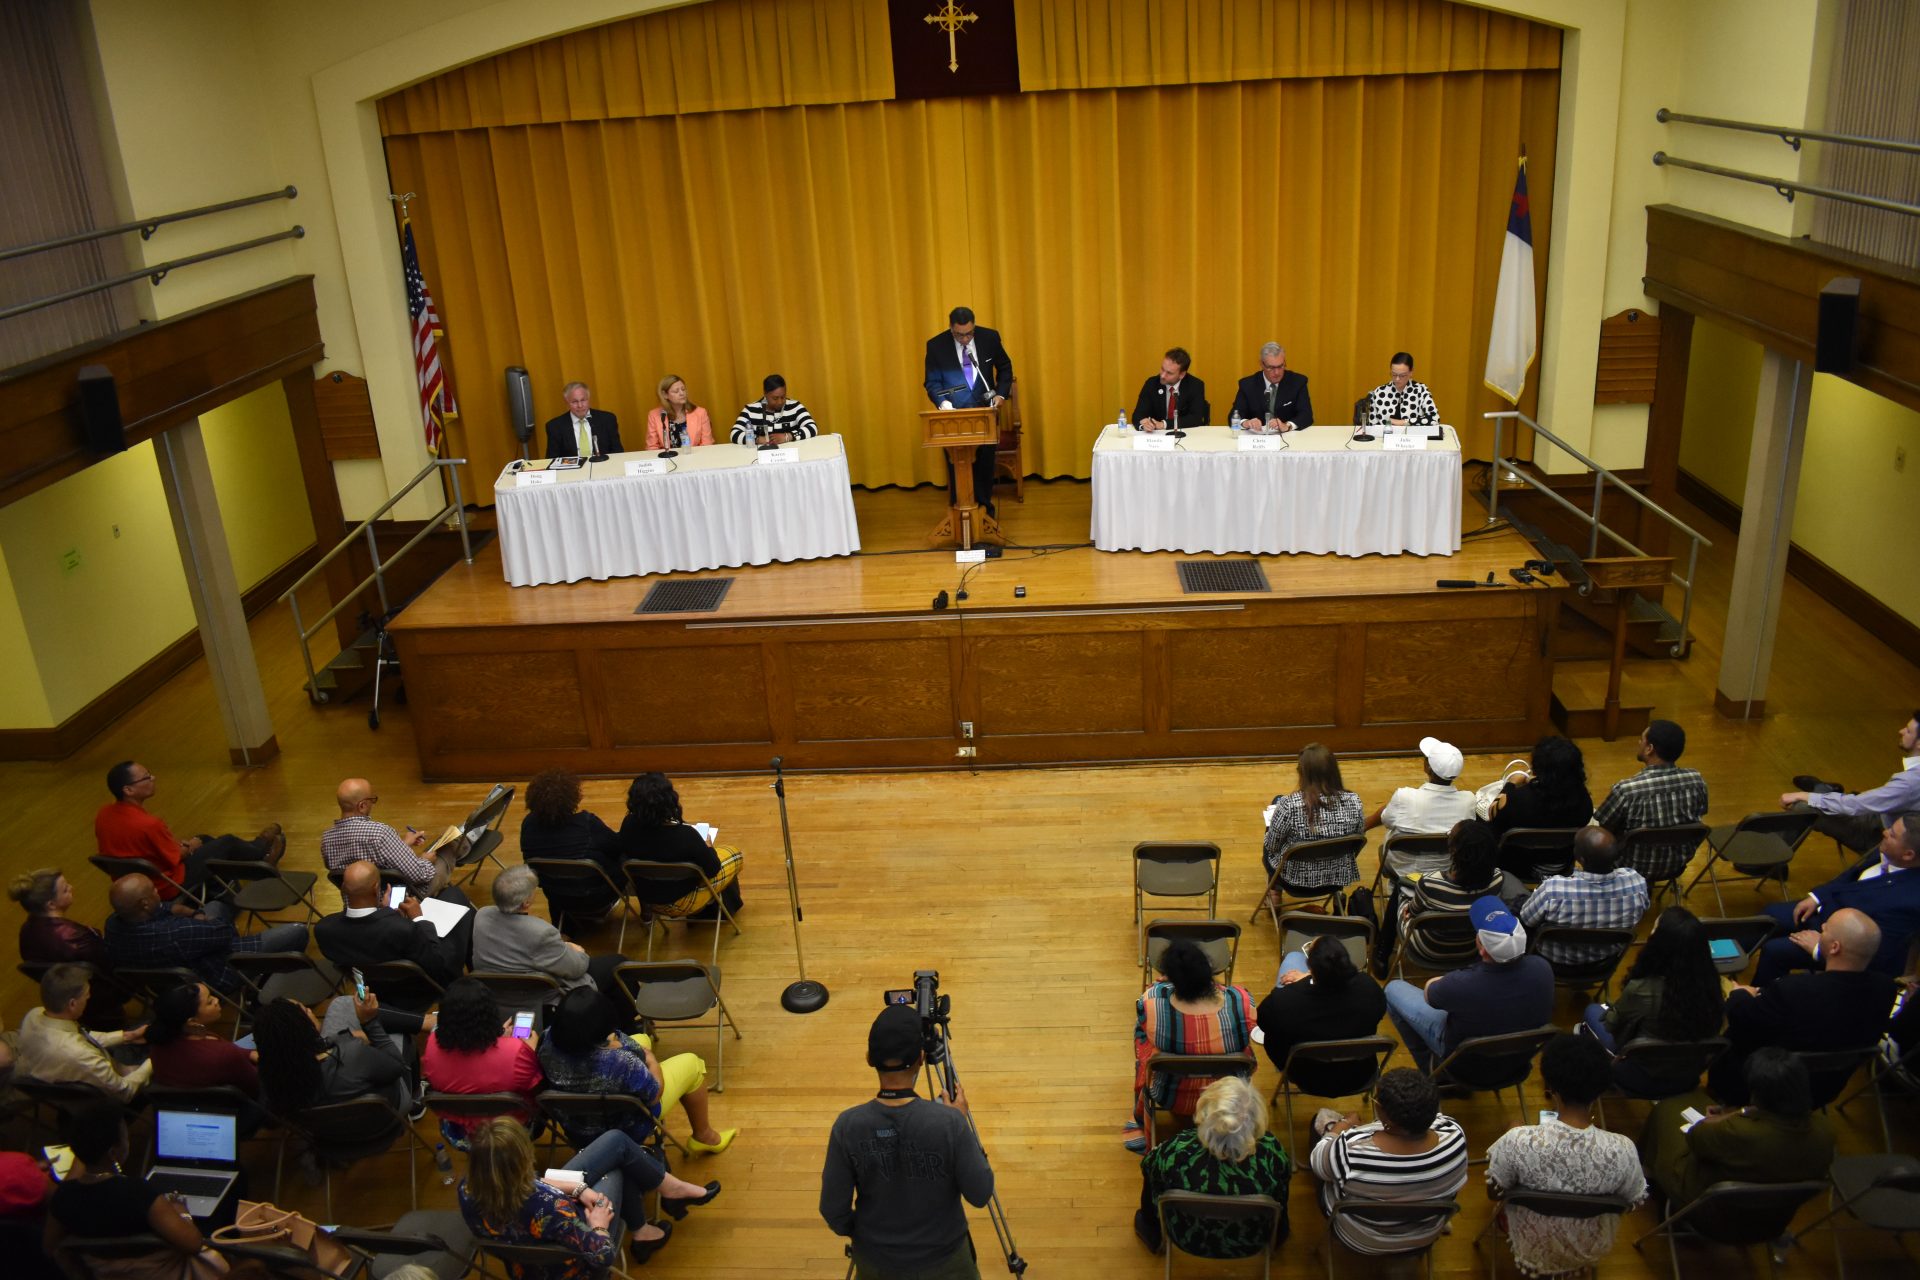 Six candidates for York County commissioner participate in a forum on April 10, 2019, at Zion United Church of Christ in York.